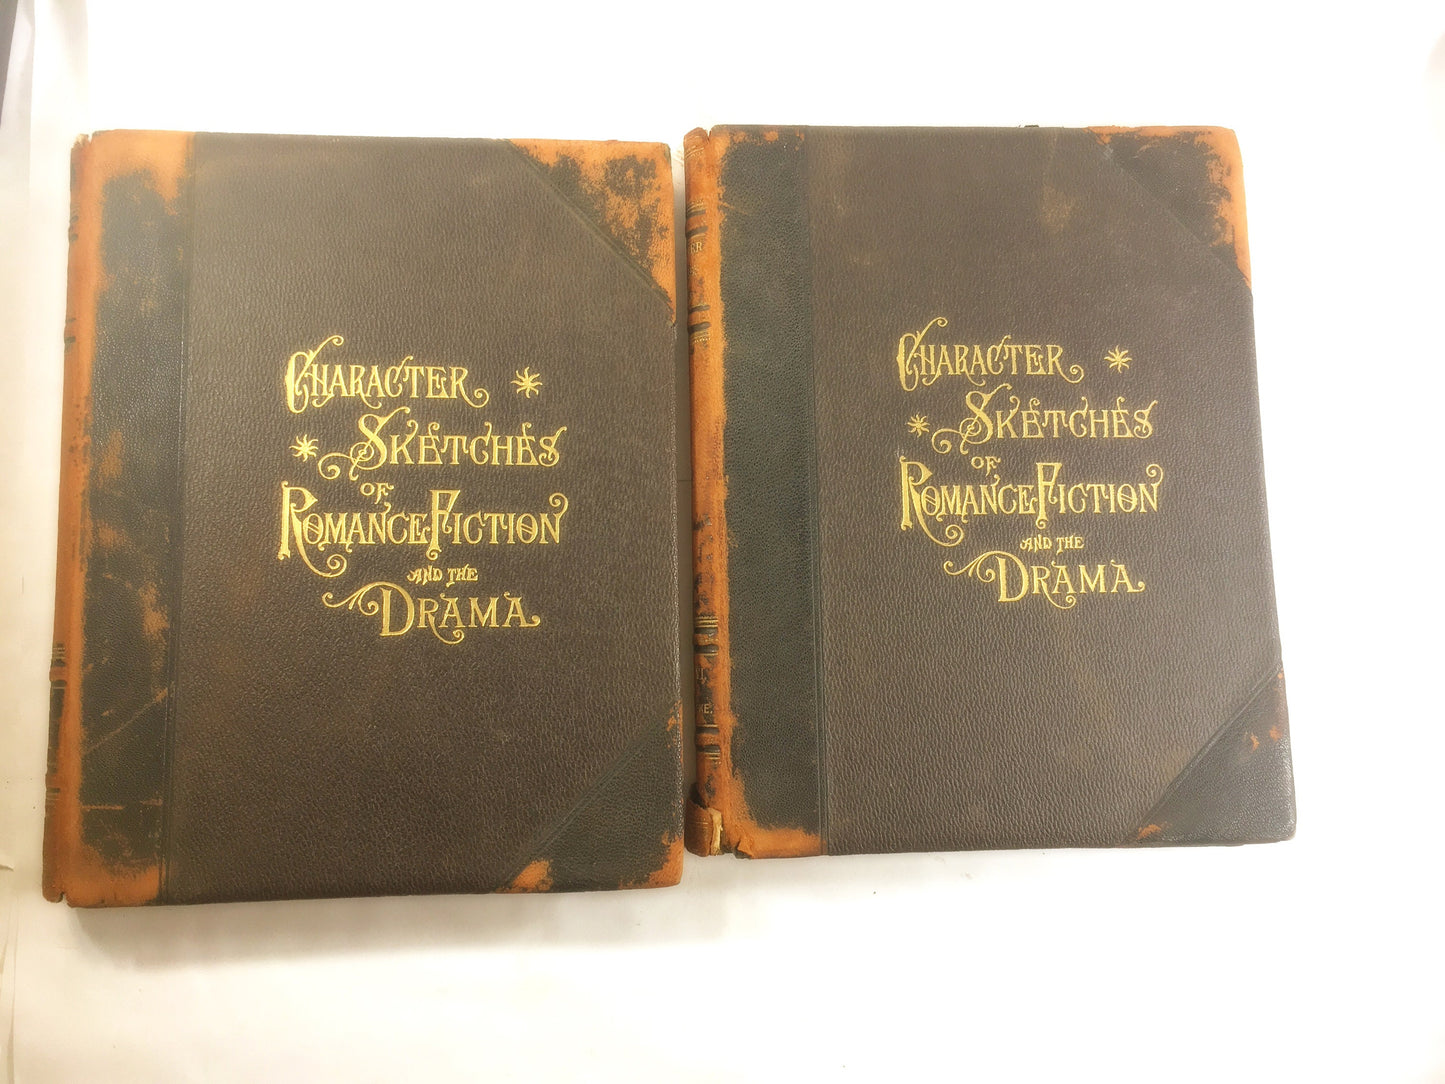 Antique book set Character Sketches of Romance Fiction and Drama FIRST EDITION 2 volumes vintage books home office decor